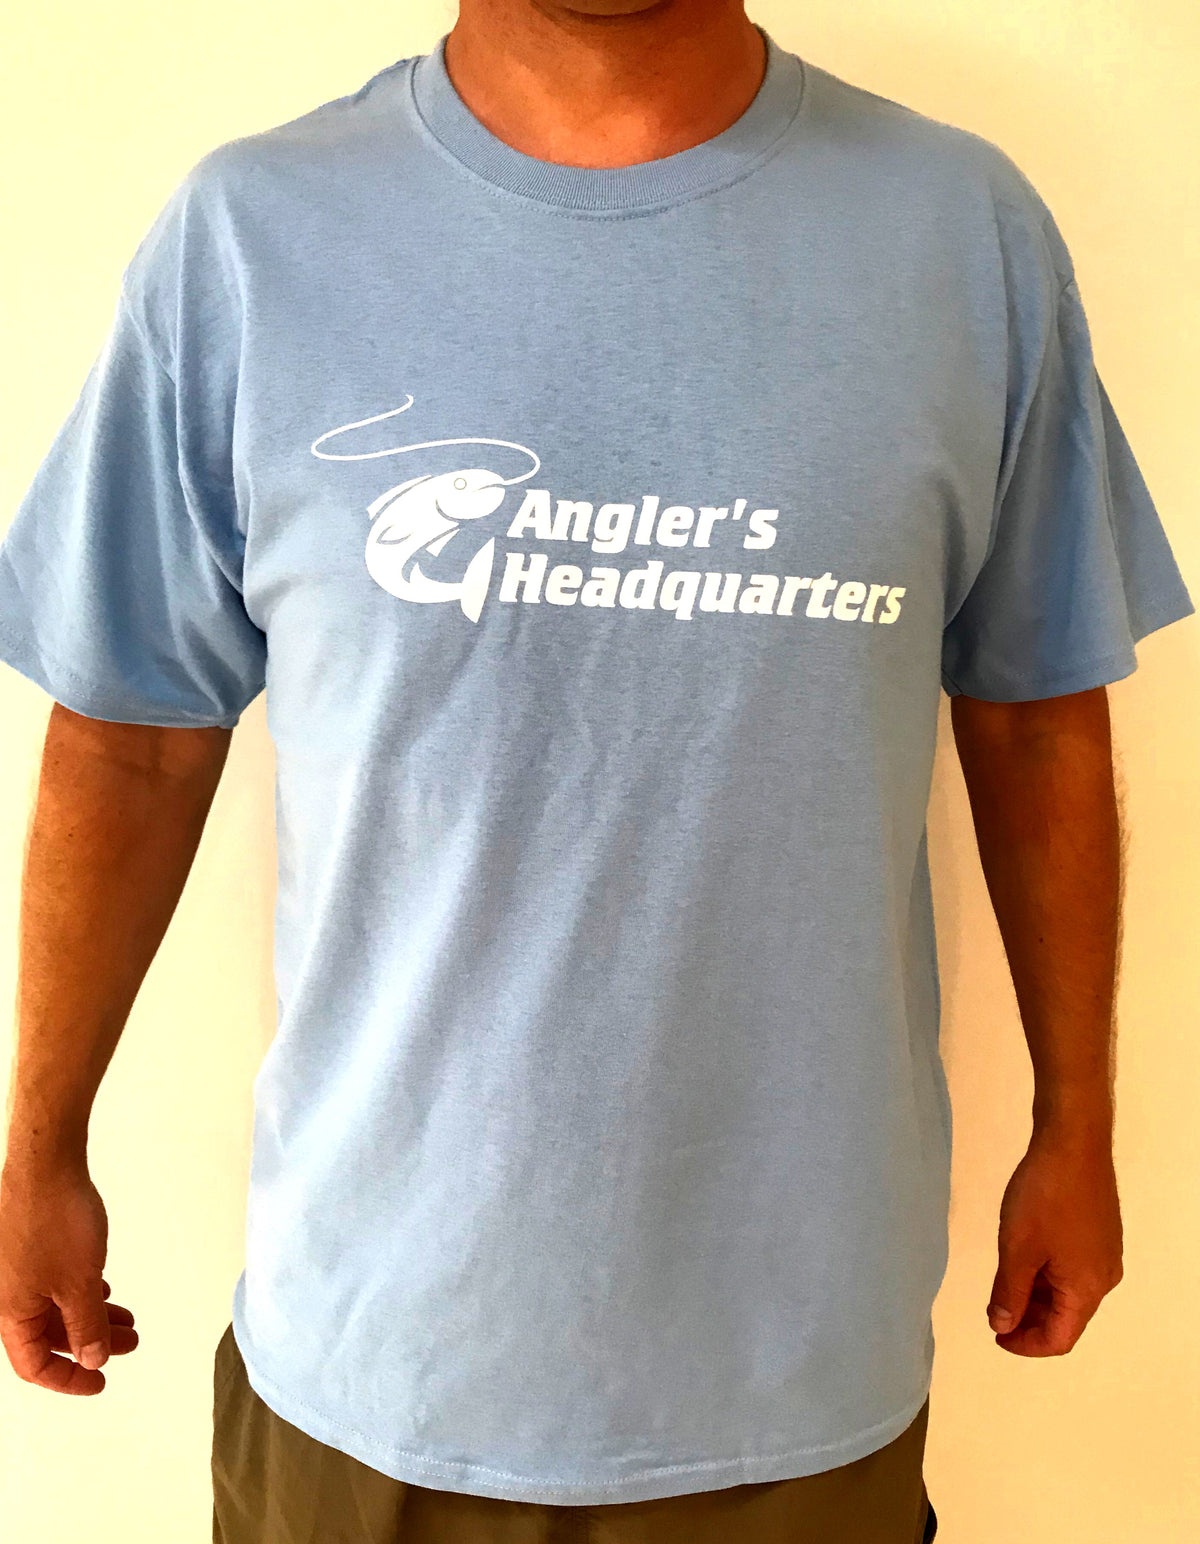 Angler's Headquarters Shirts (Youth Sizes) - Angler's Headquarters